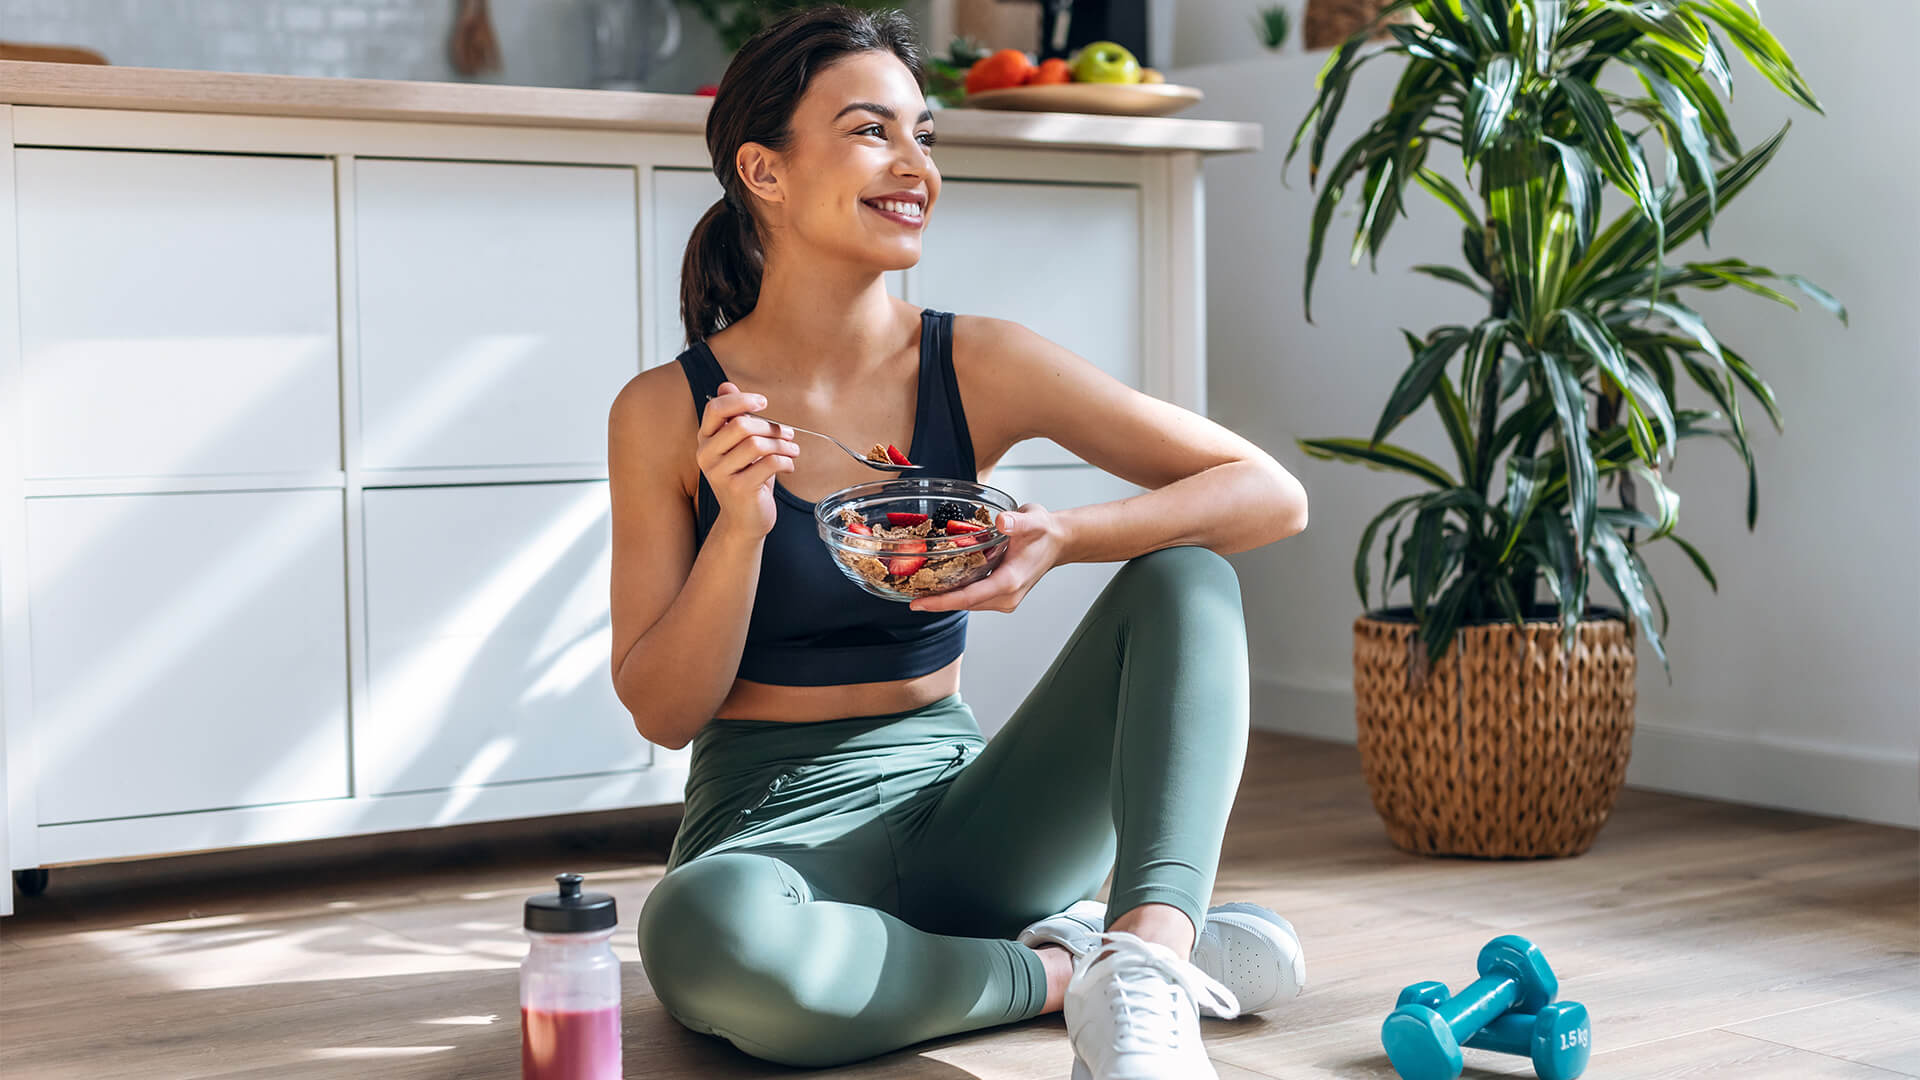 Athletic woman eating a healthy bowl of muesli with fruit sitting on floor in the kitchen at home